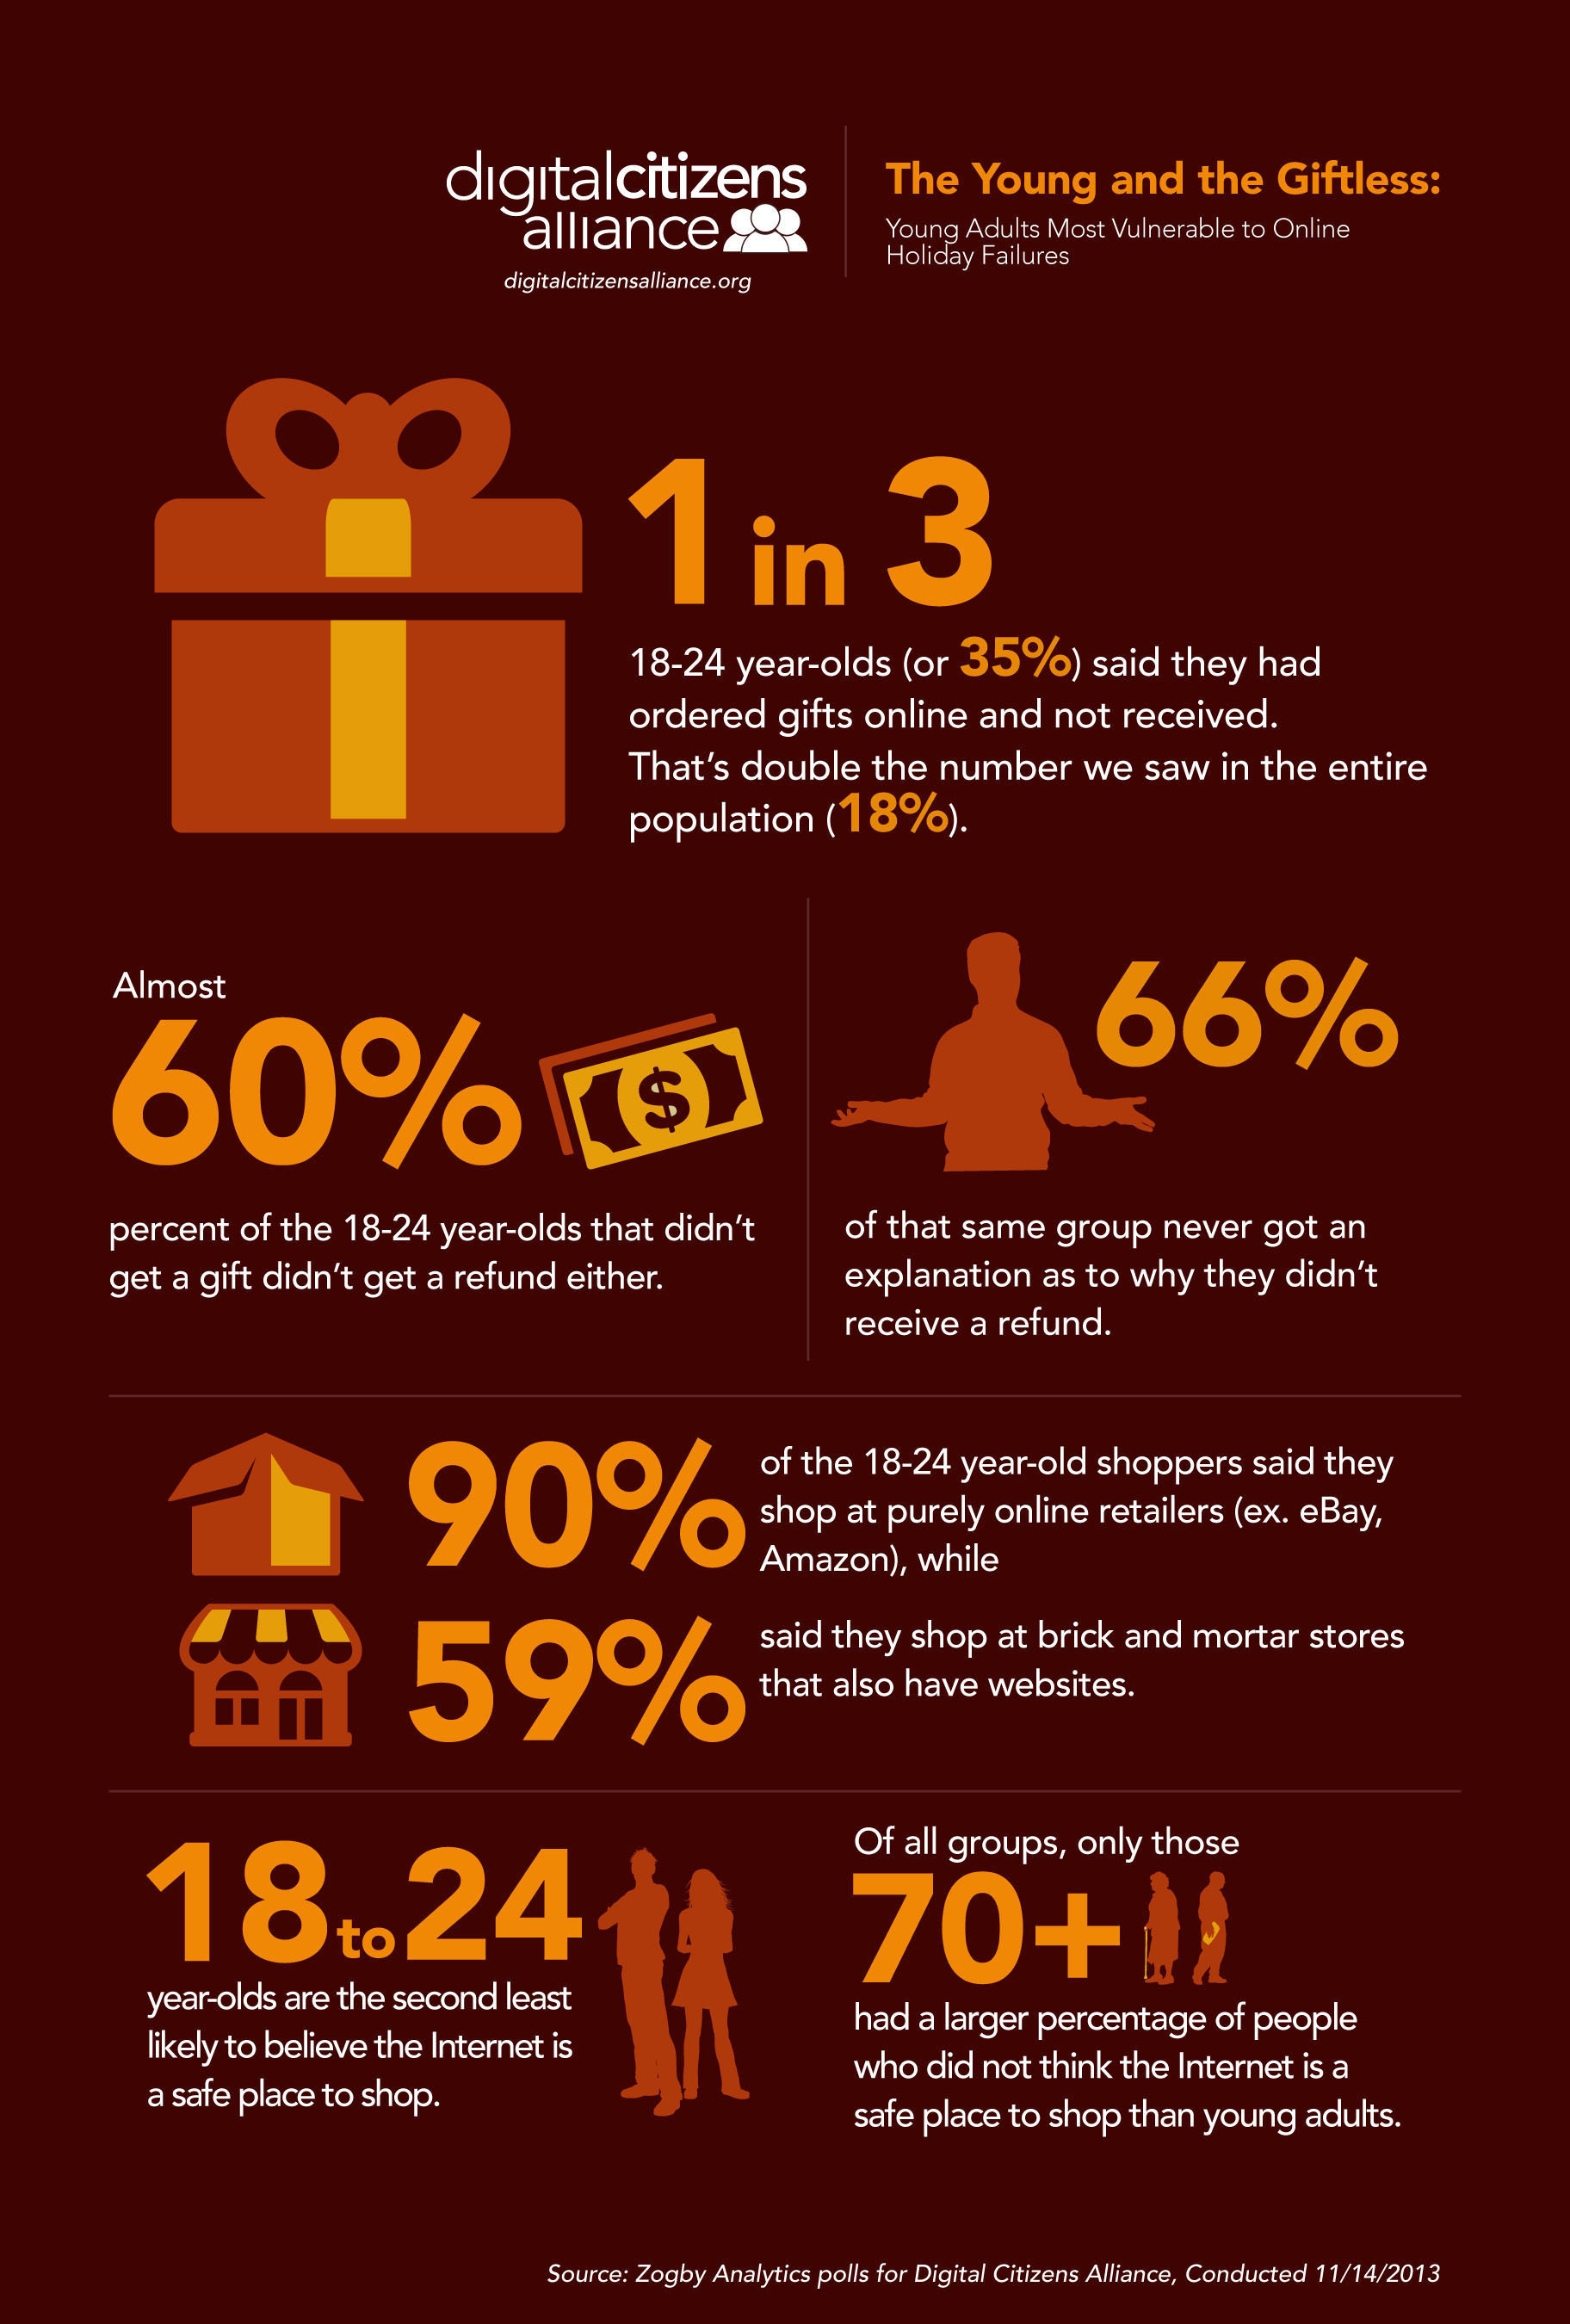 New polling from the consumer watchdog group, Digital Citizens Alliance, shows the potential problems facing young adults this Cyber Monday. (PRNewsFoto/Digital Citizens Alliance) (PRNewsFoto/DIGITAL CITIZENS ALLIANCE)